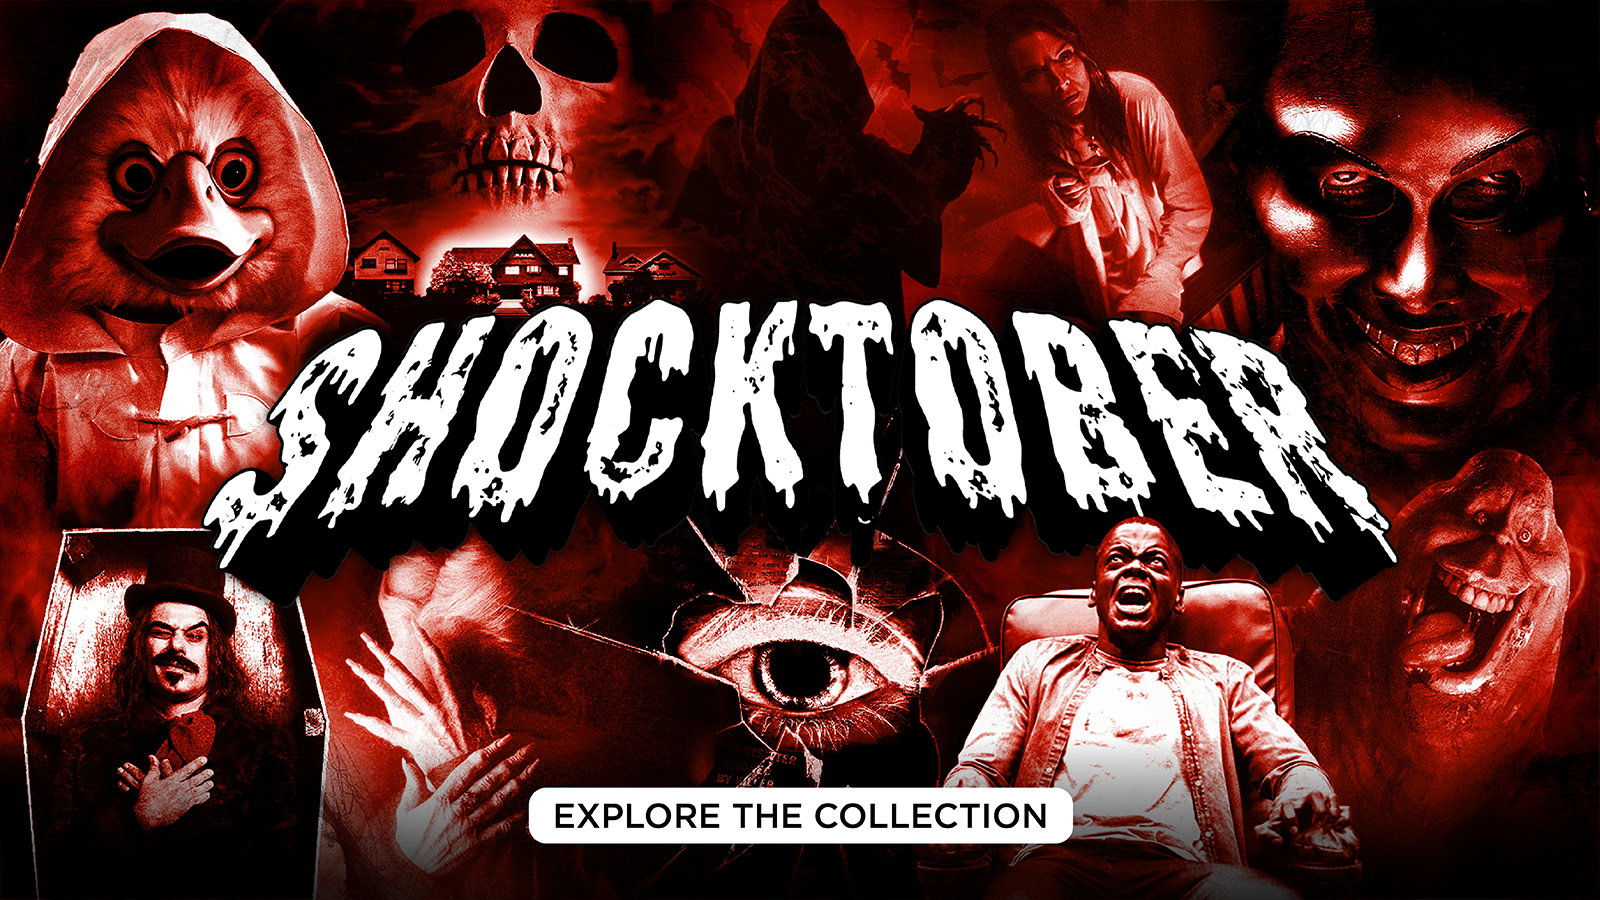 Shocktober - Explore the Collection